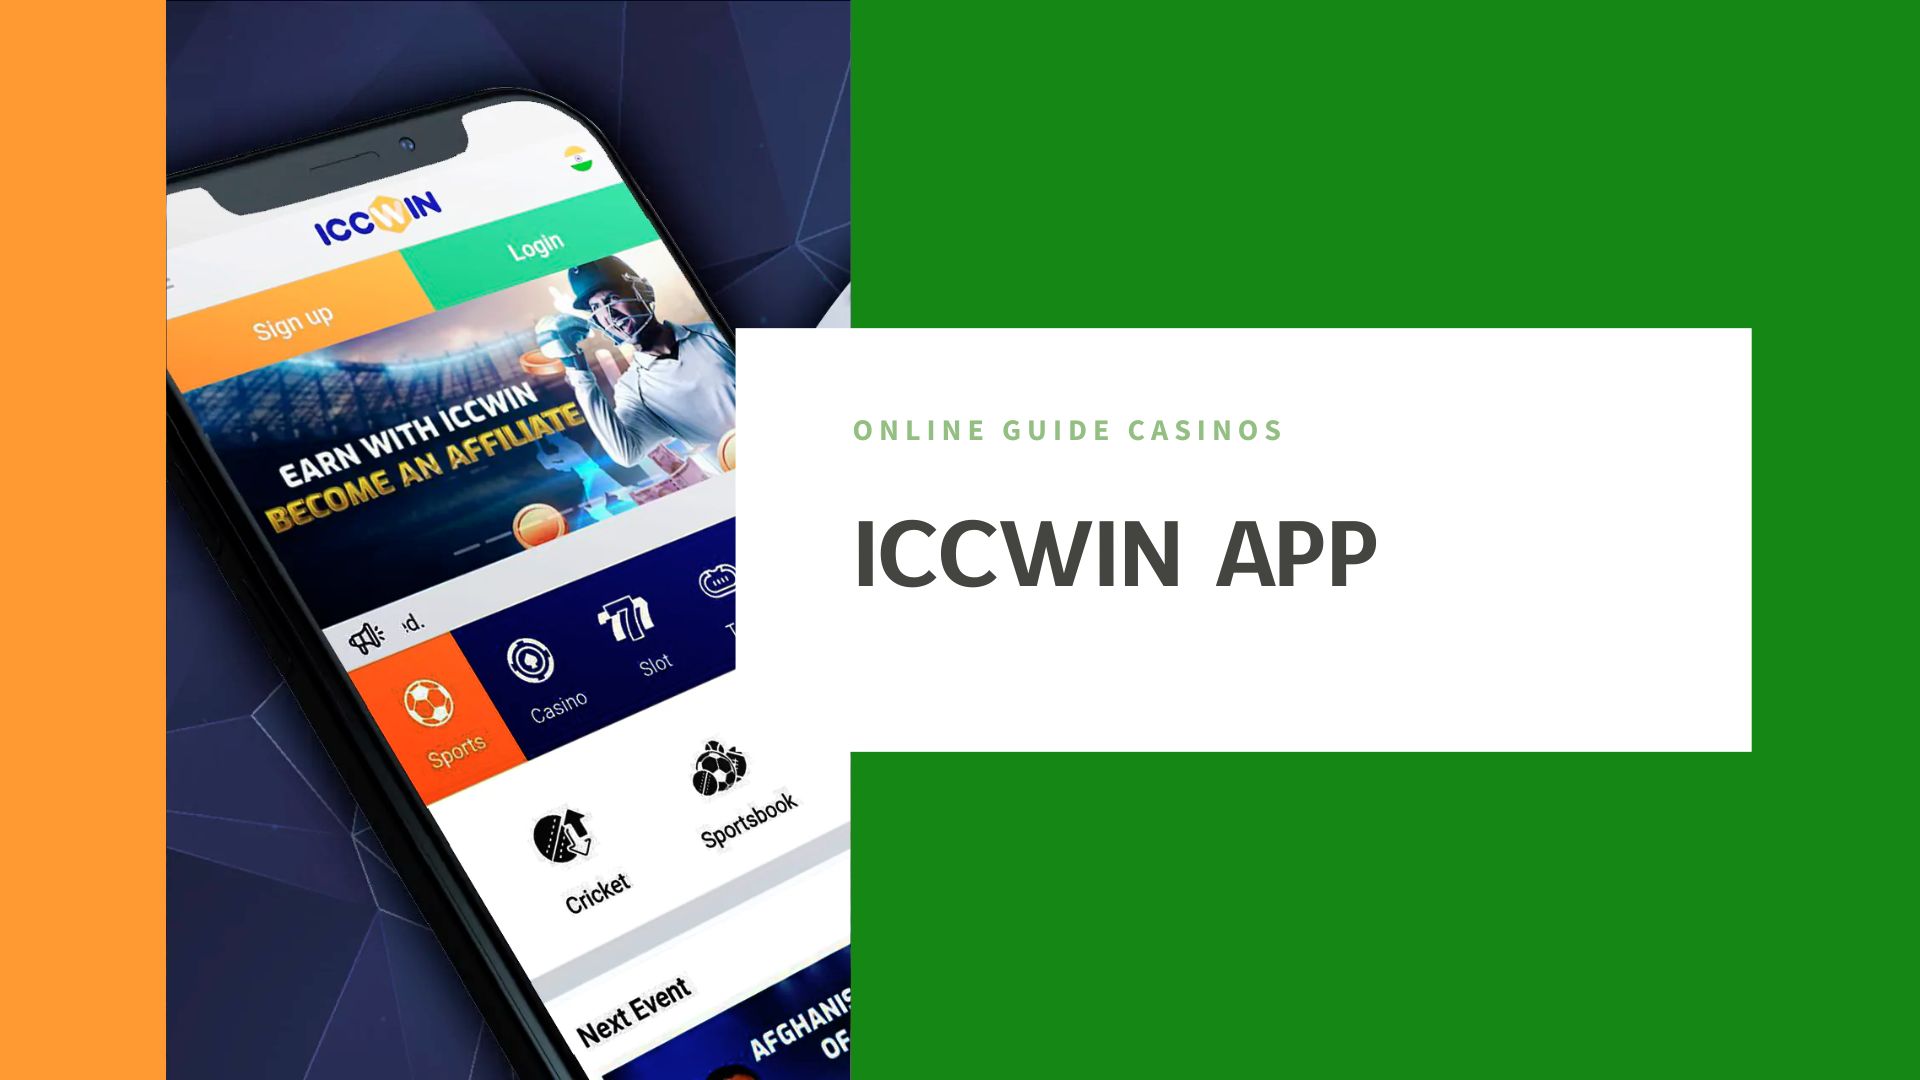 Iccwin App Download Capable for Free on Android | Overview